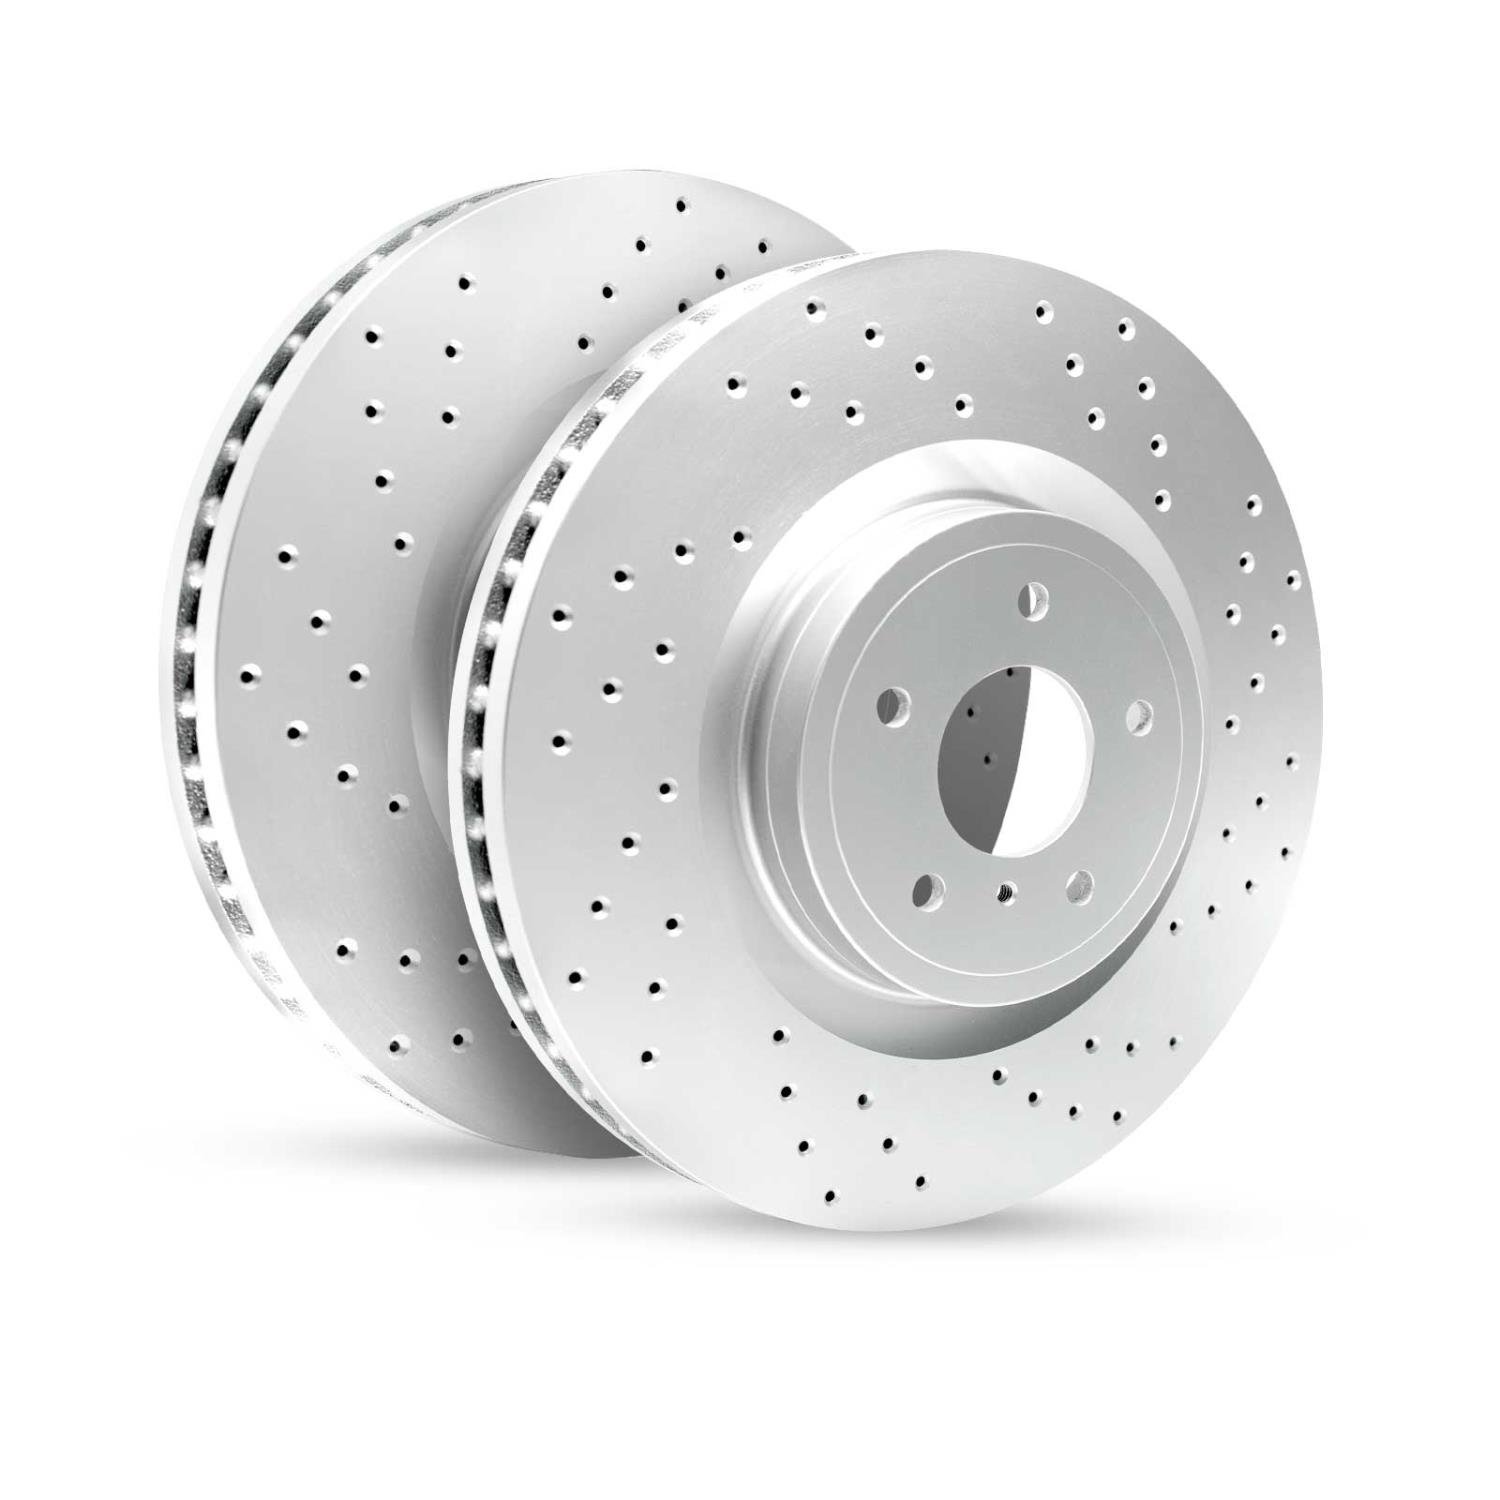 GEO-Carbon Drilled/Slotted Rotors, 1990-2014 Acura/Honda,